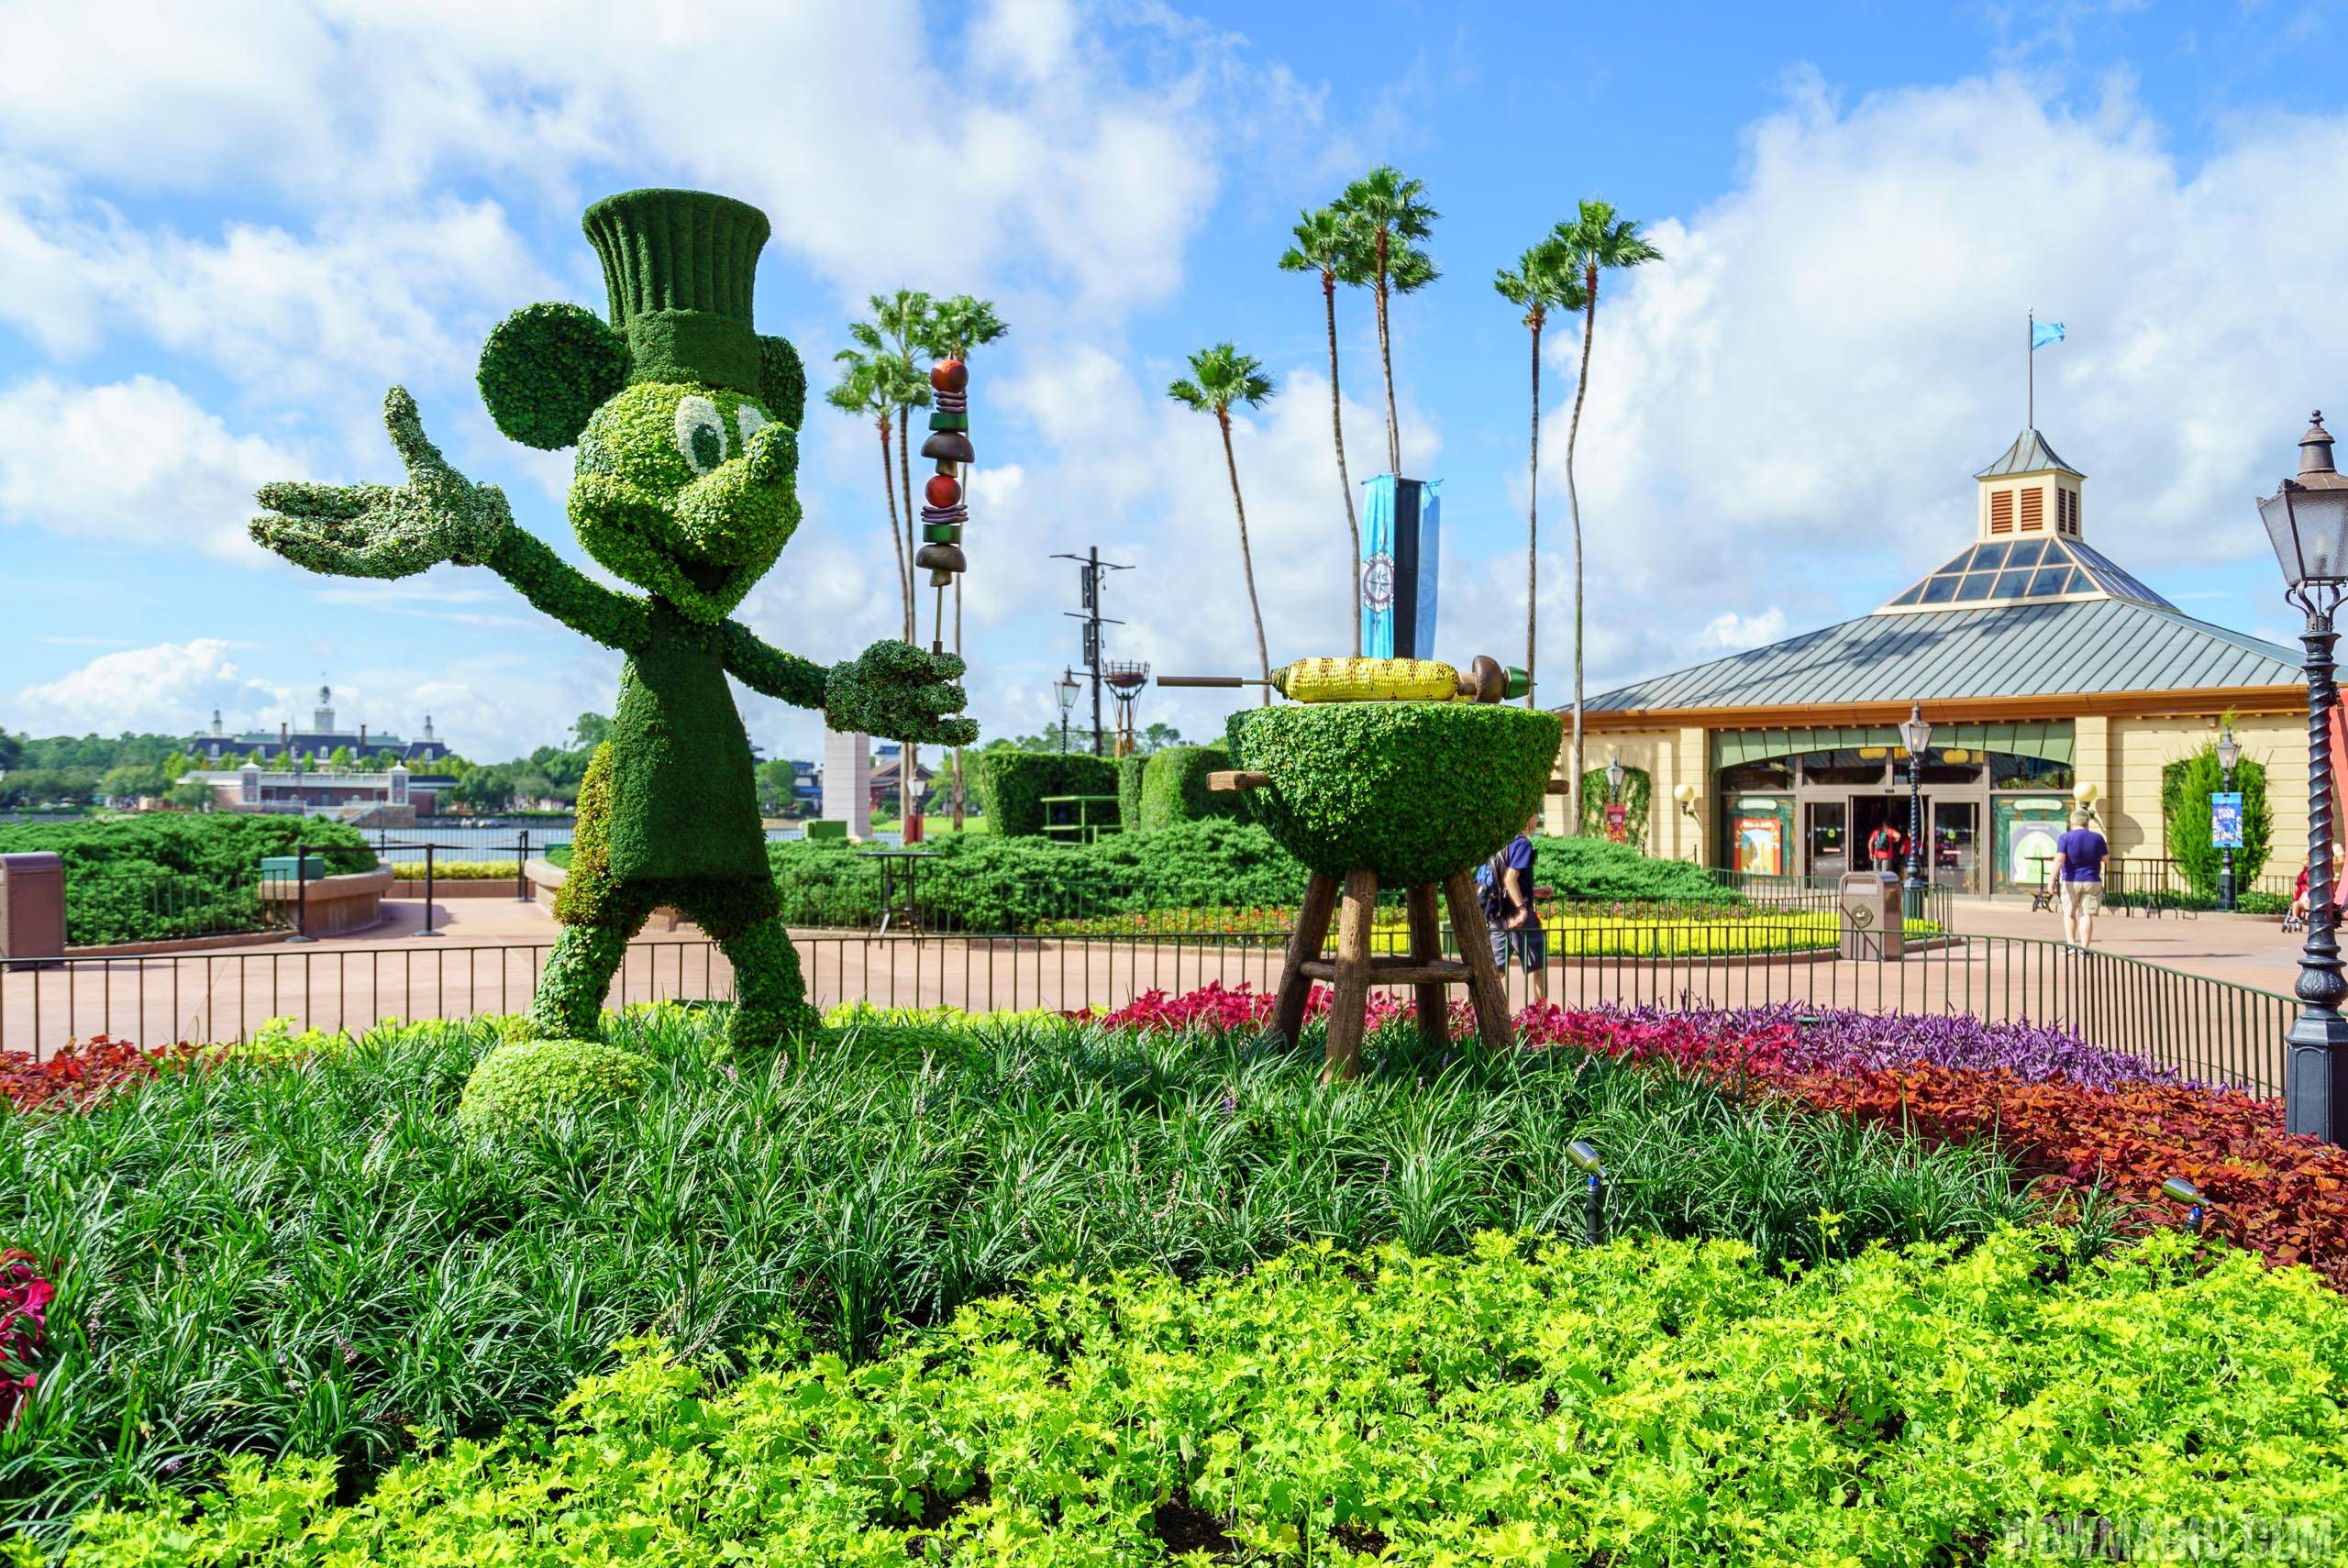 2016 Epcot Food and Wine Festival - Mickey topiary at World Showcase Plaza